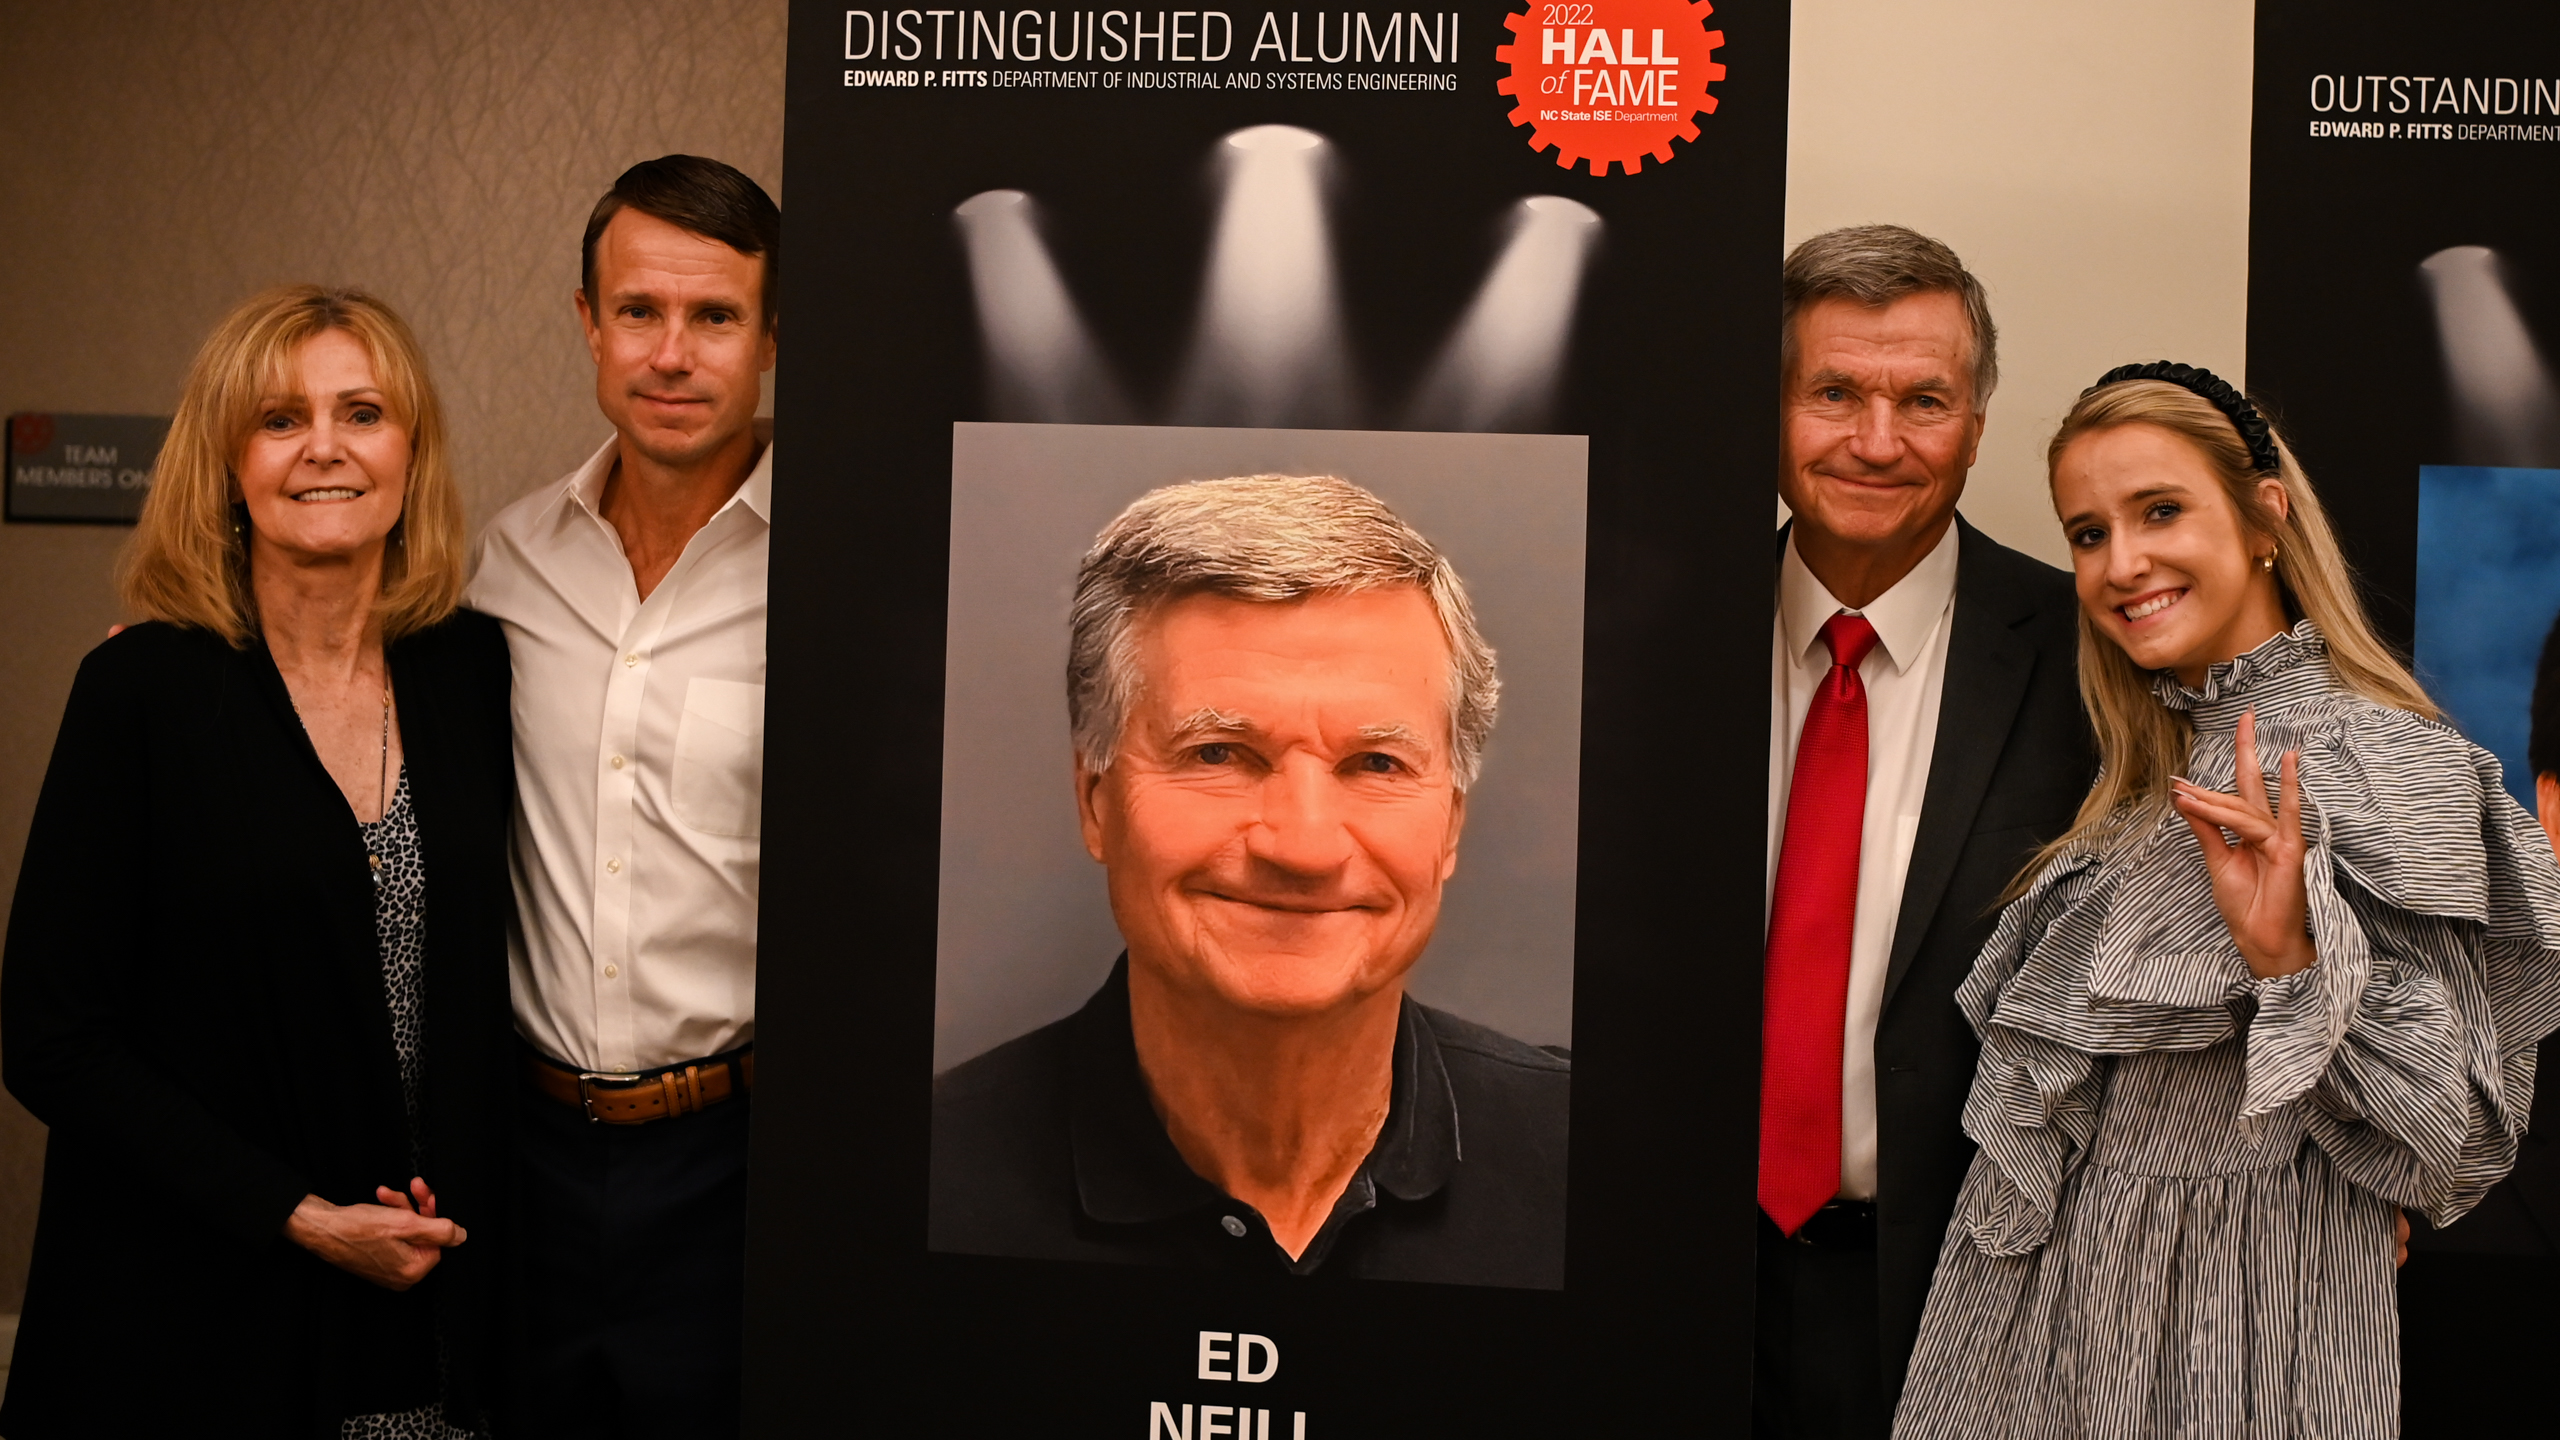 Ed Neill and his family posing in front of Ed's Distinguished Alumni banner